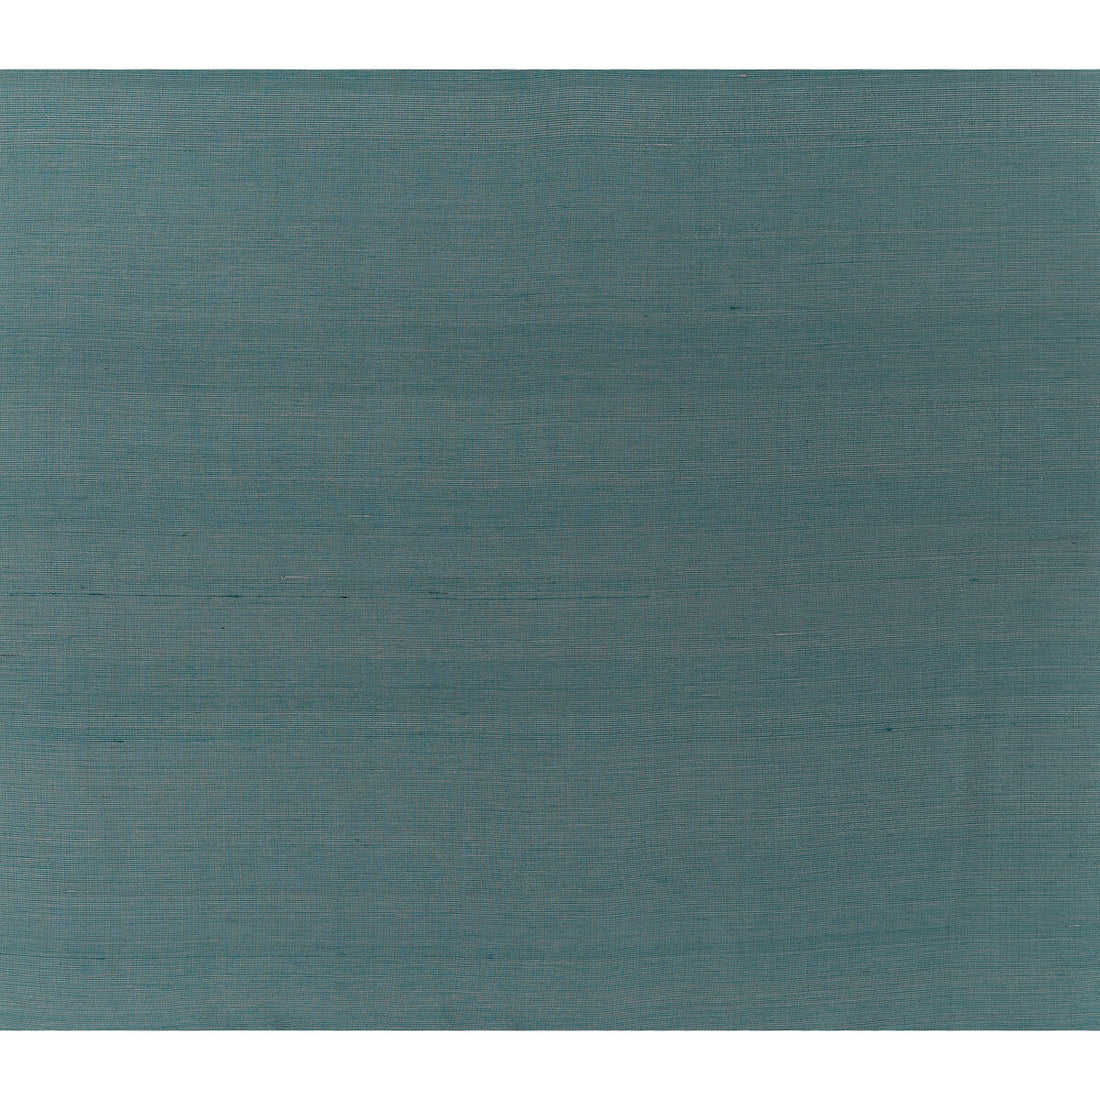 Silk Twist fabric in aqua pura color - pattern JAG-50052.13.0 - by Brunschwig &amp; Fils in the Jagtar collection